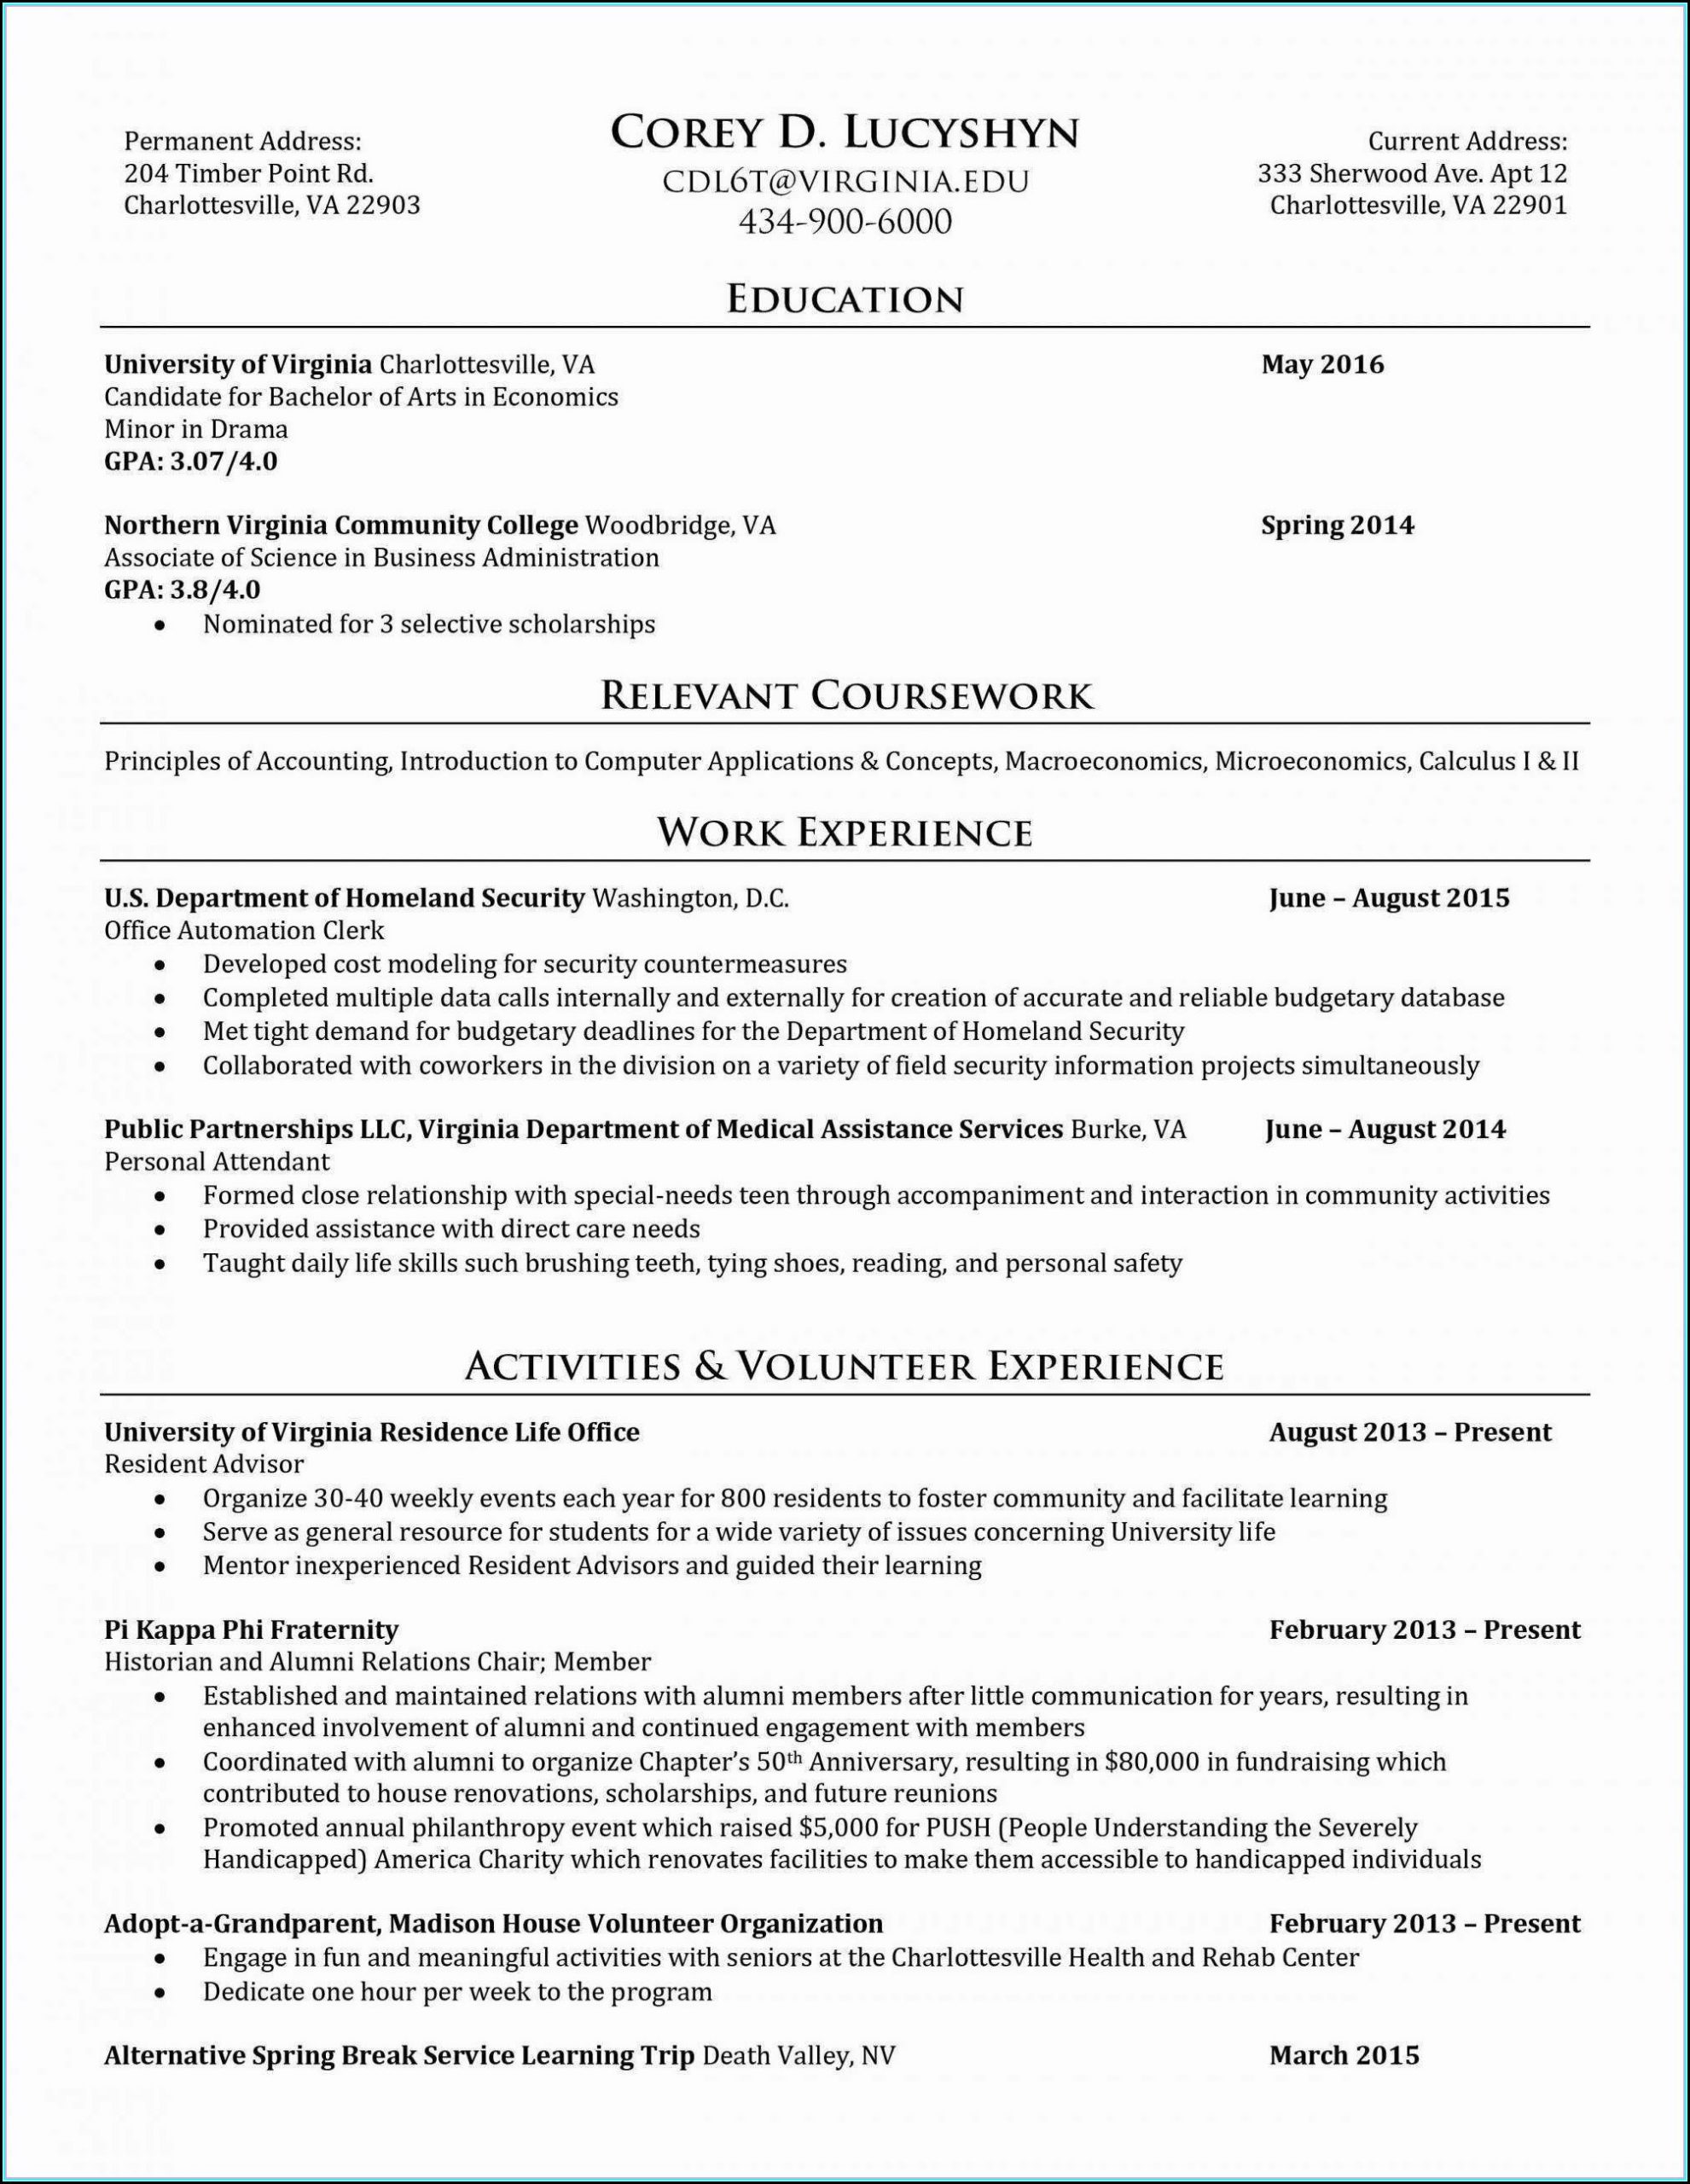 Samples Of Resumes for Older Workers Resume for Older Workers Template Resume Resume